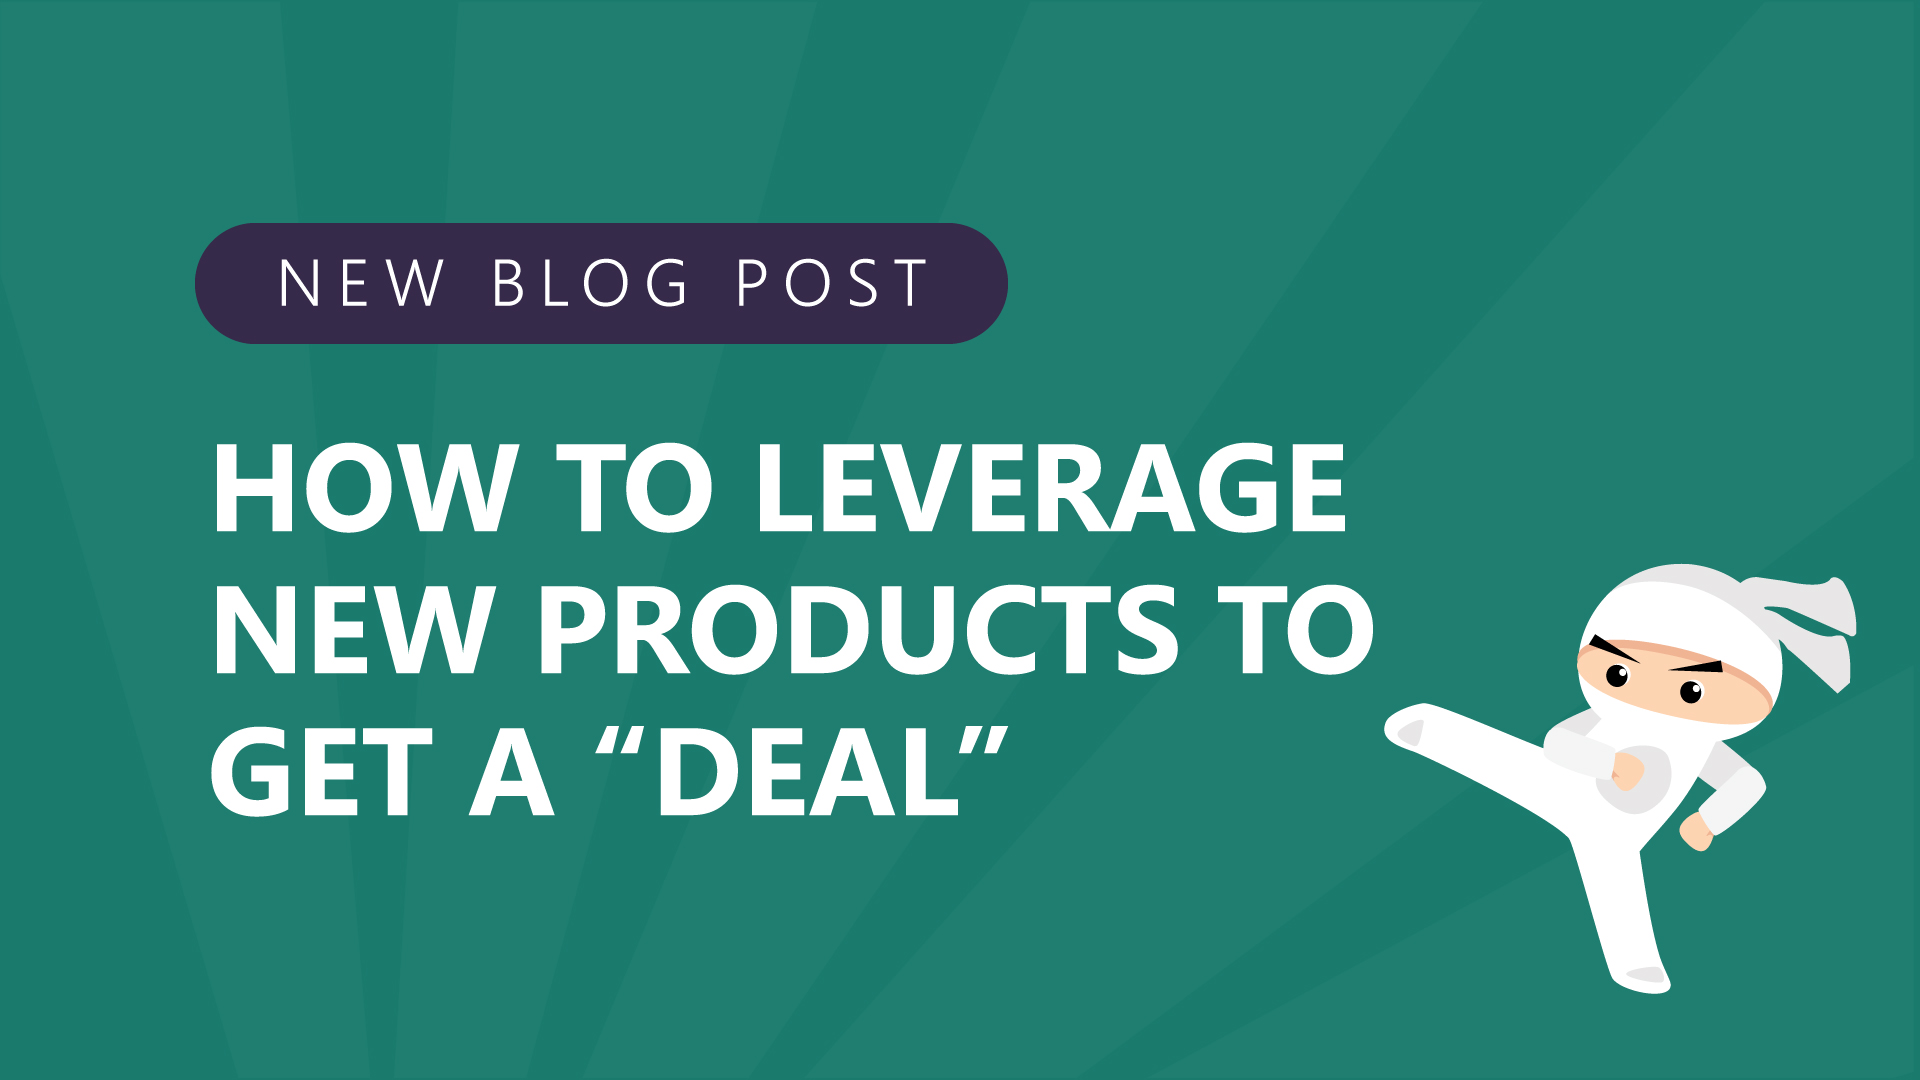 Leverage New Products